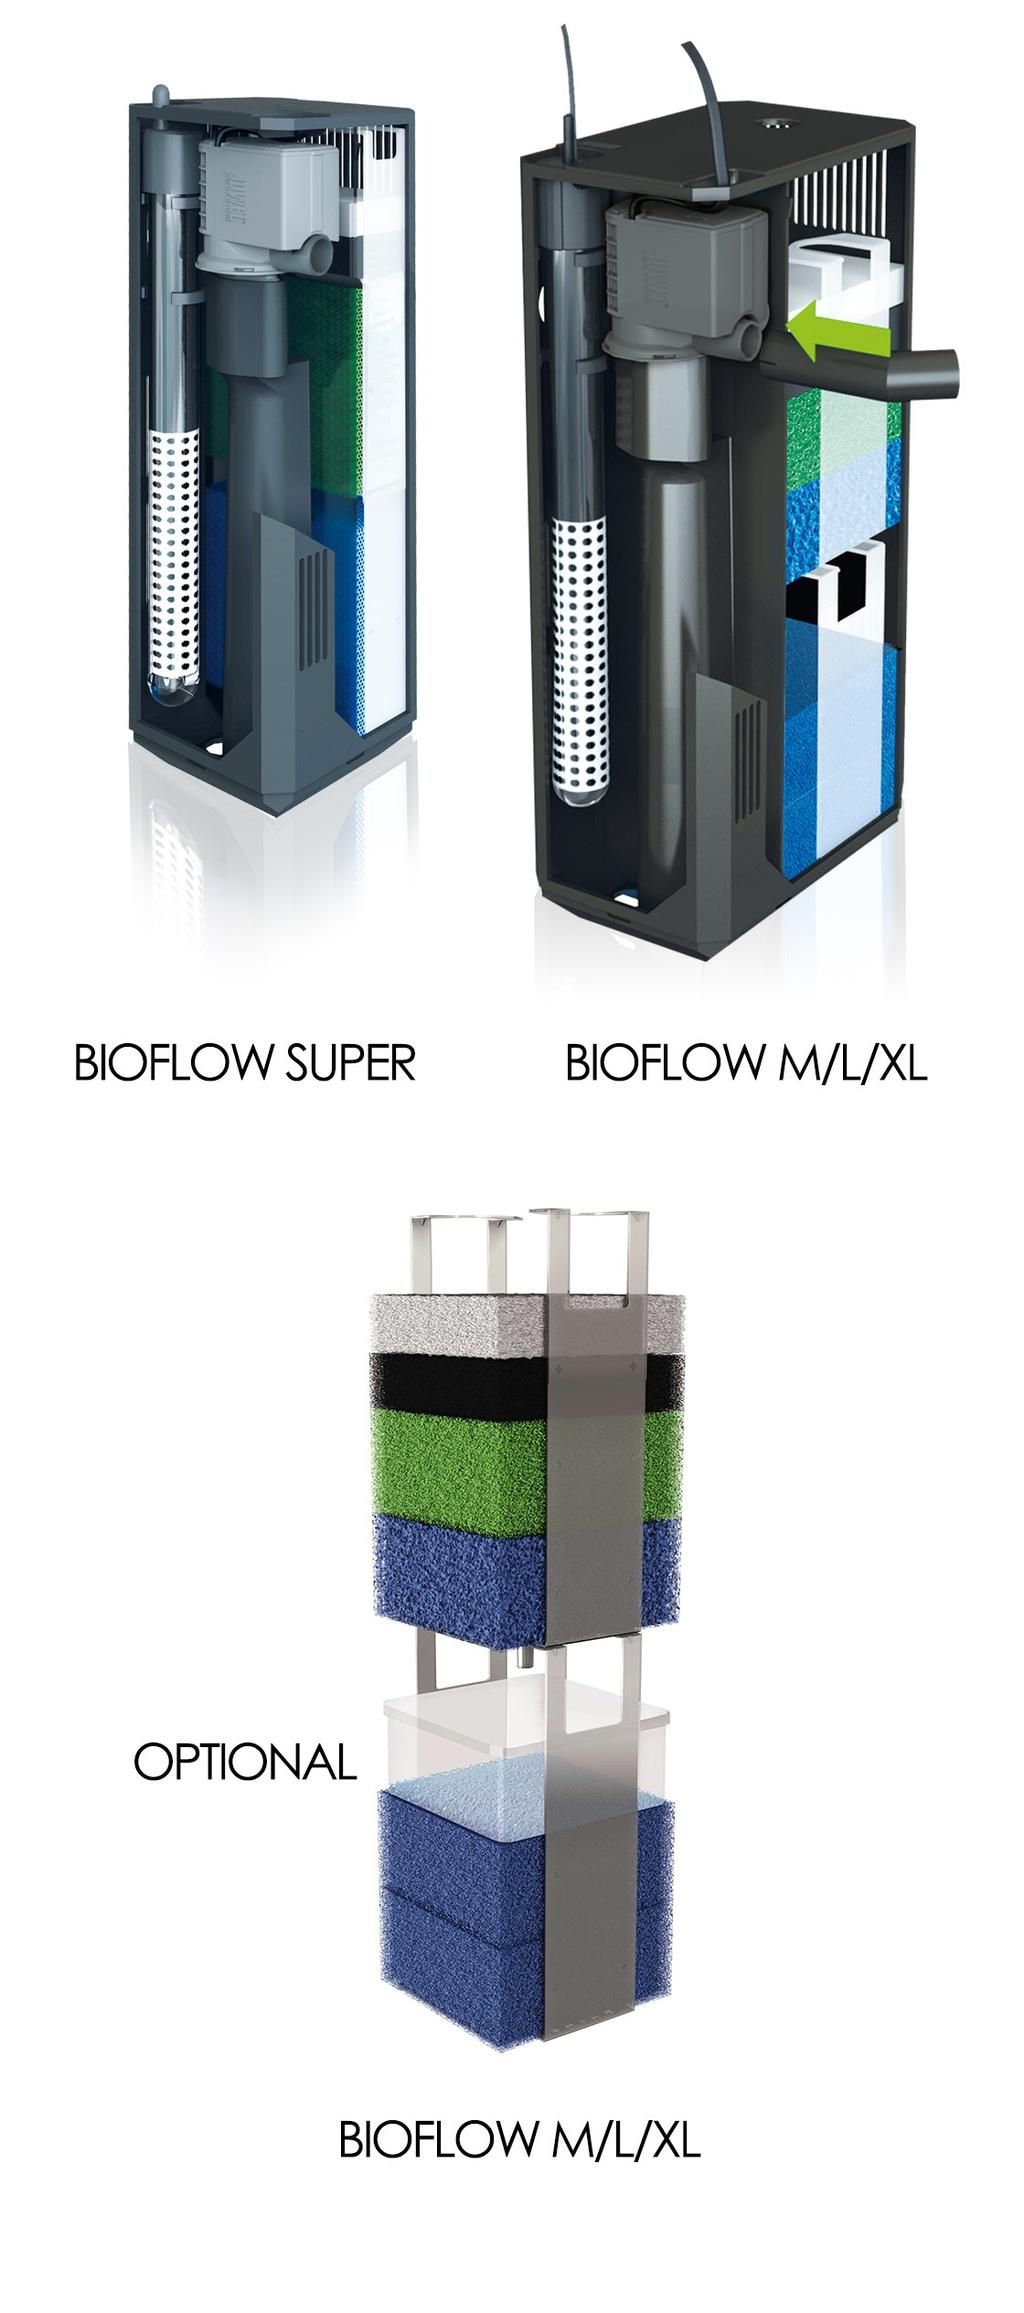 The JUWEL filter system Bioflow The JUWEL ﬁlter system Bioﬂow is a highly eﬀective biological ﬁlter system with two stages that includes components complementing each other in an ideal manner.